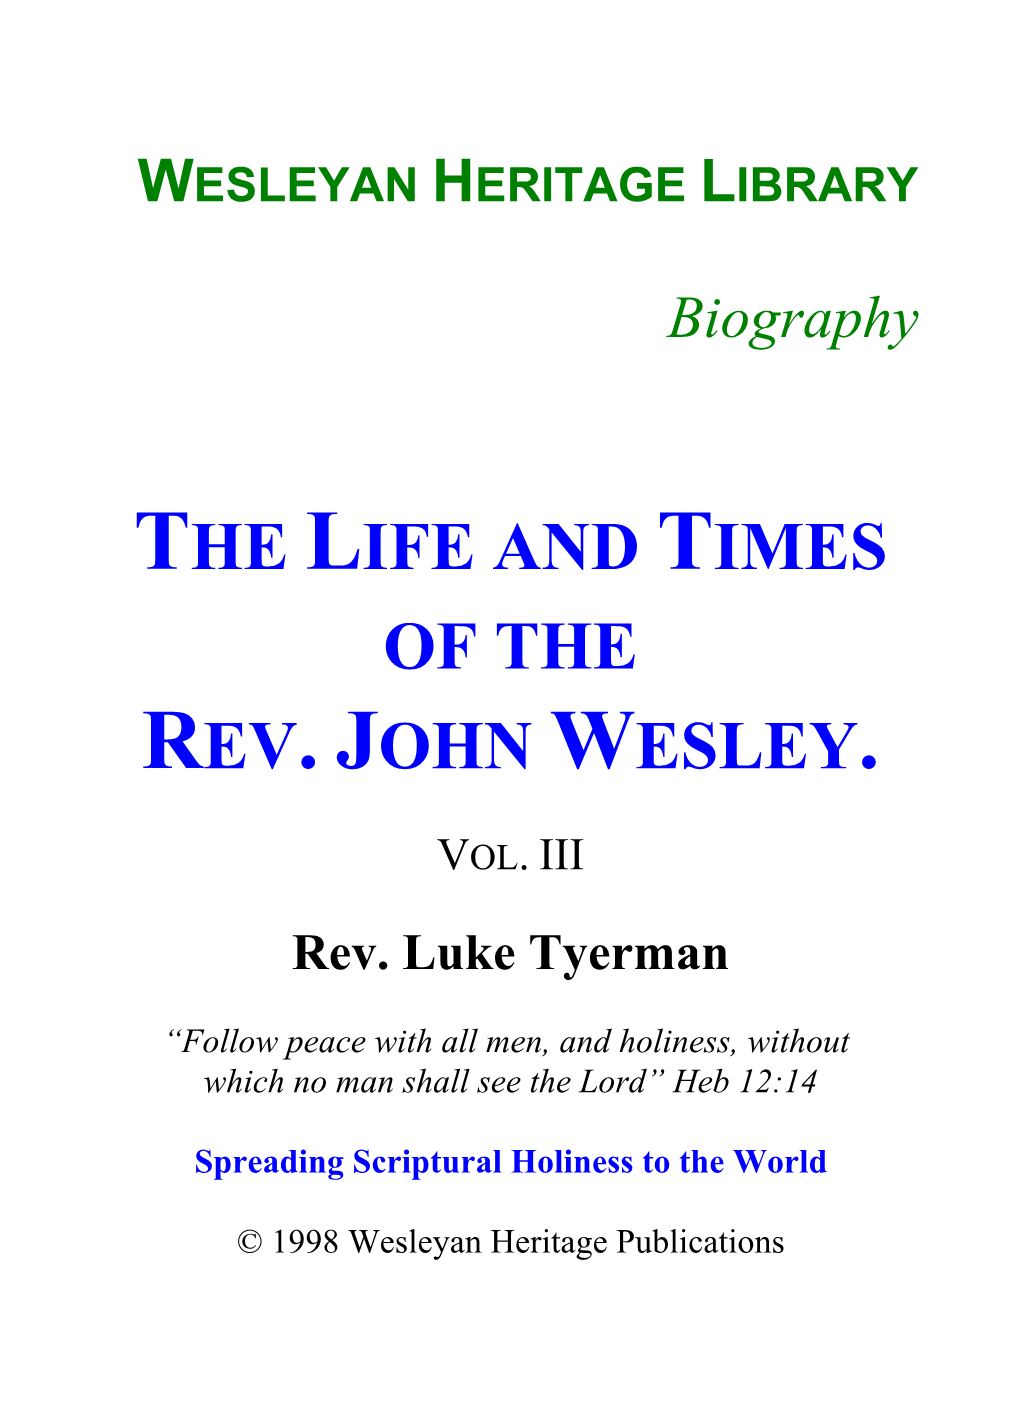 The Life and Times of the Rev. John Wesley, Vol